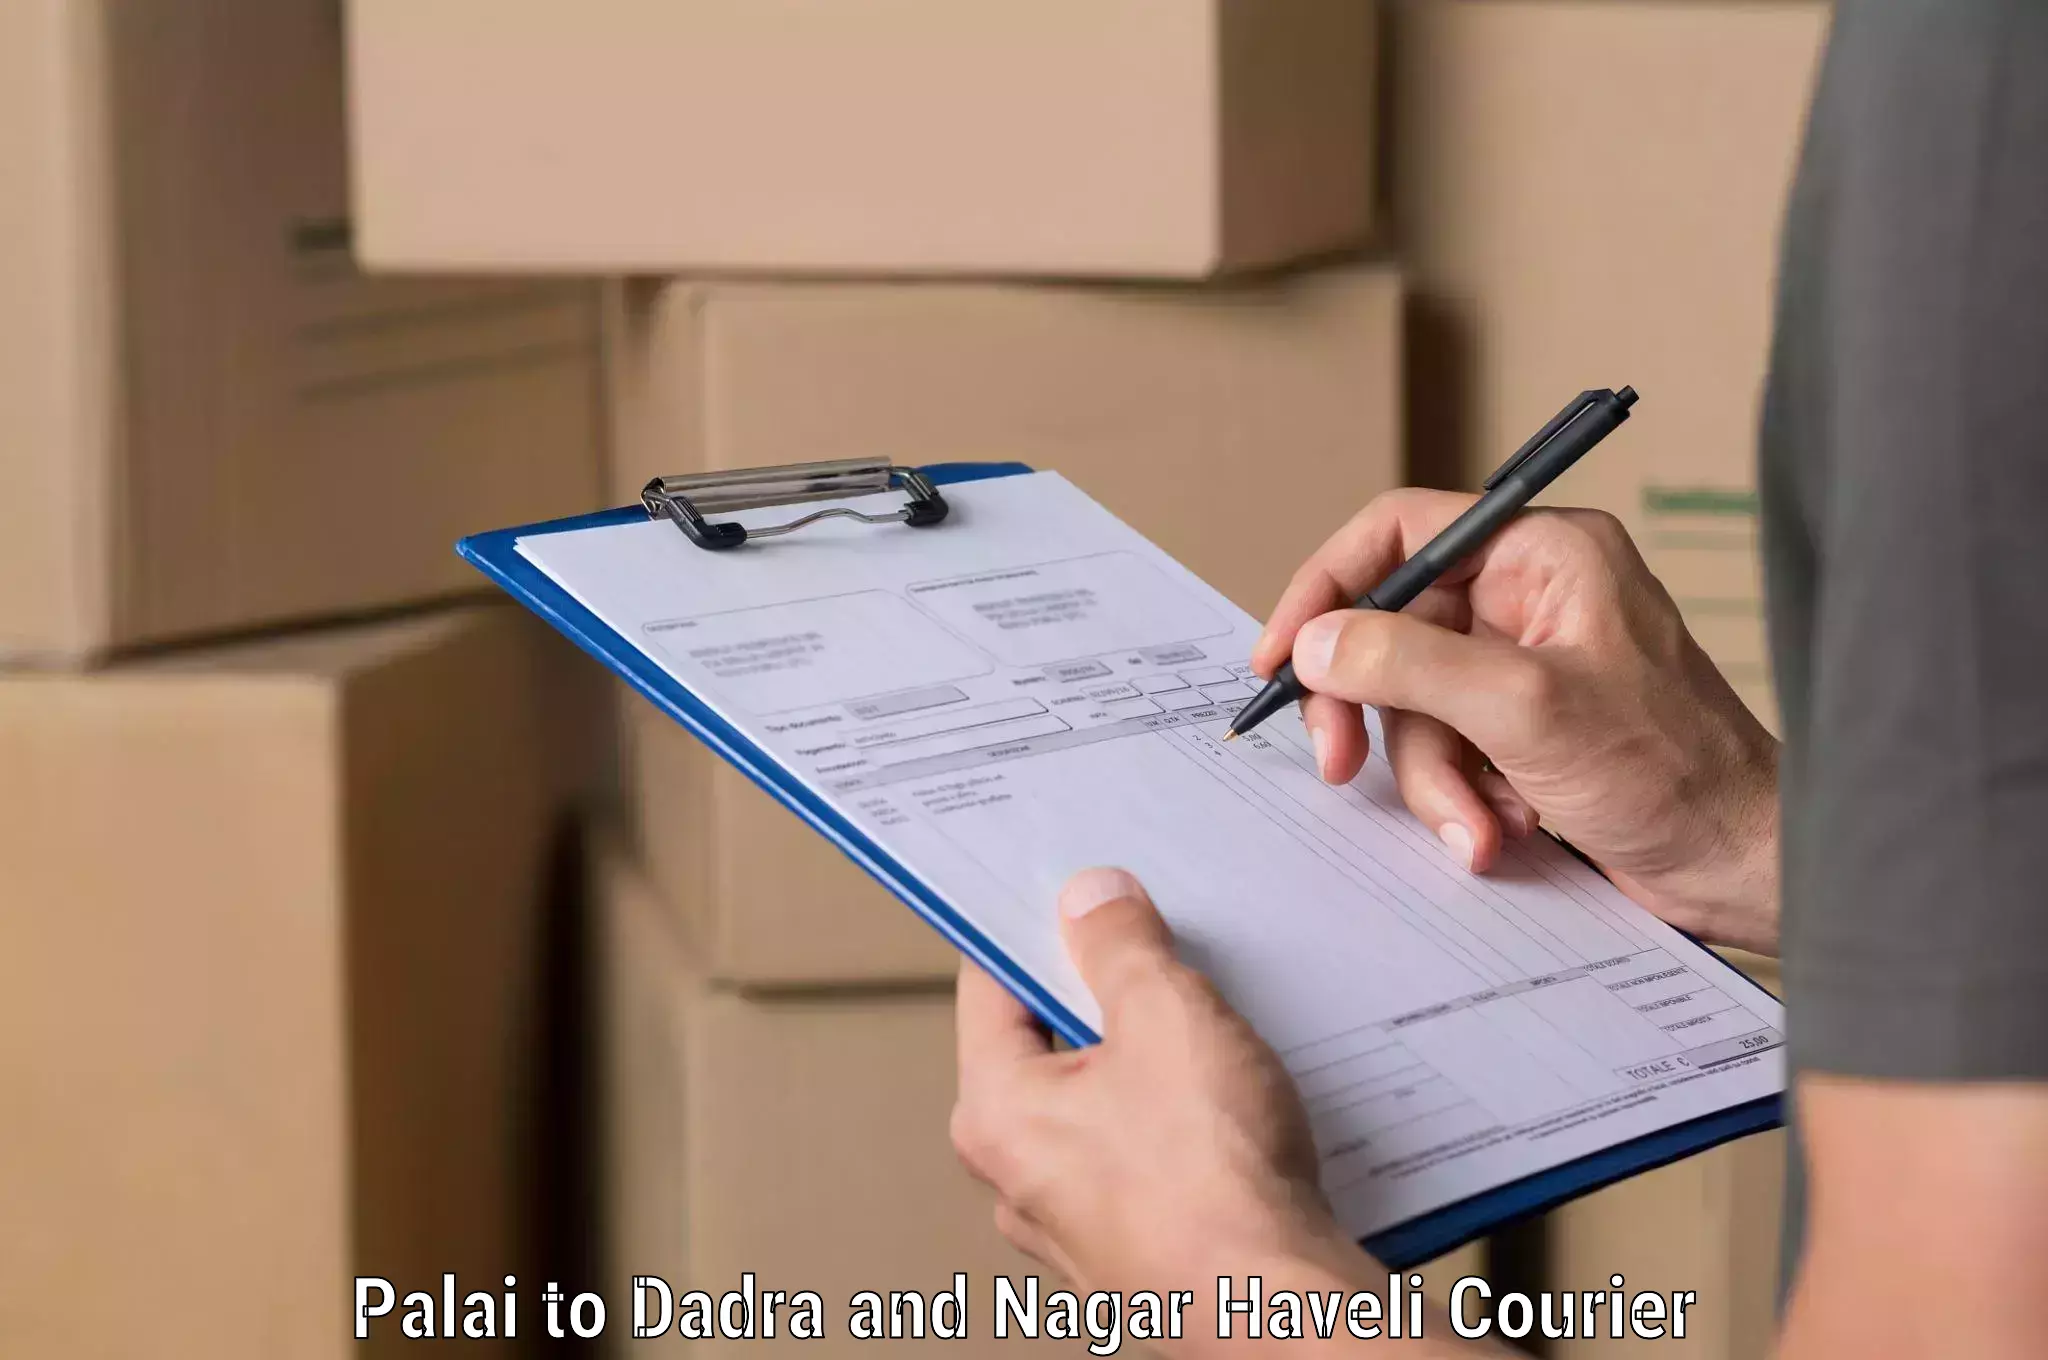 Quality courier services in Palai to Dadra and Nagar Haveli